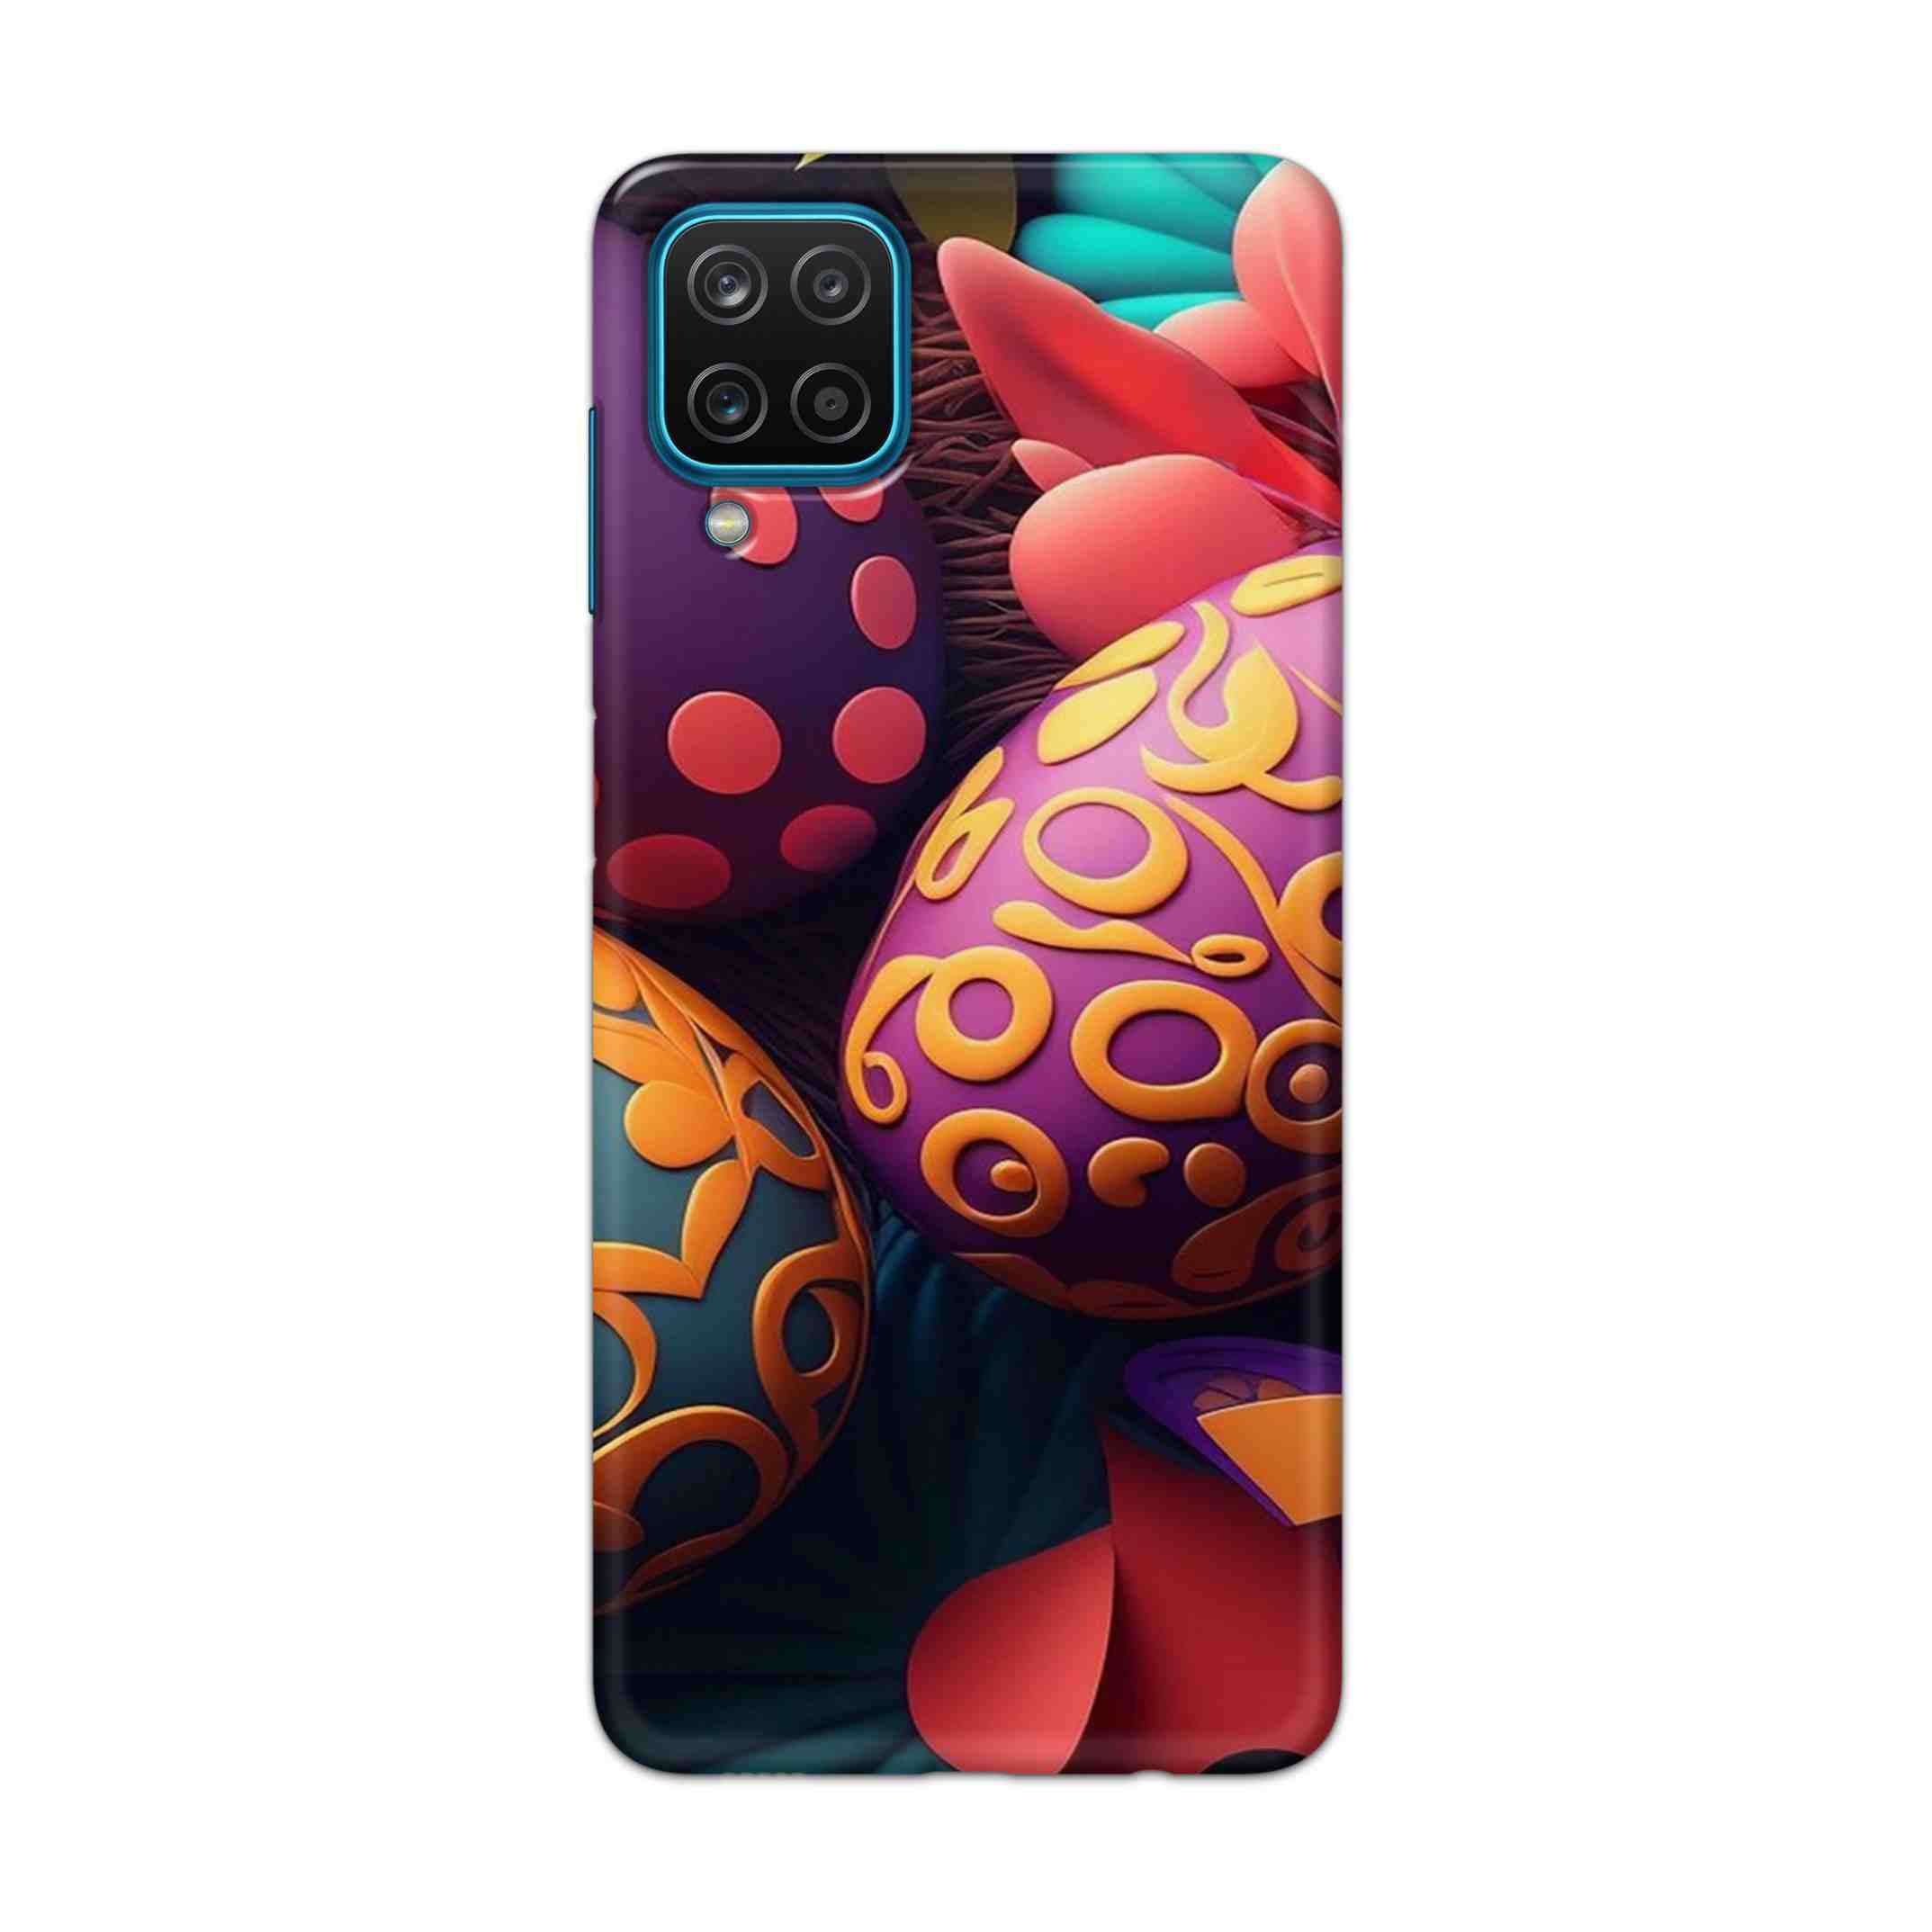 Buy Easter Egg Hard Back Mobile Phone Case Cover For Samsung Galaxy A12 Online